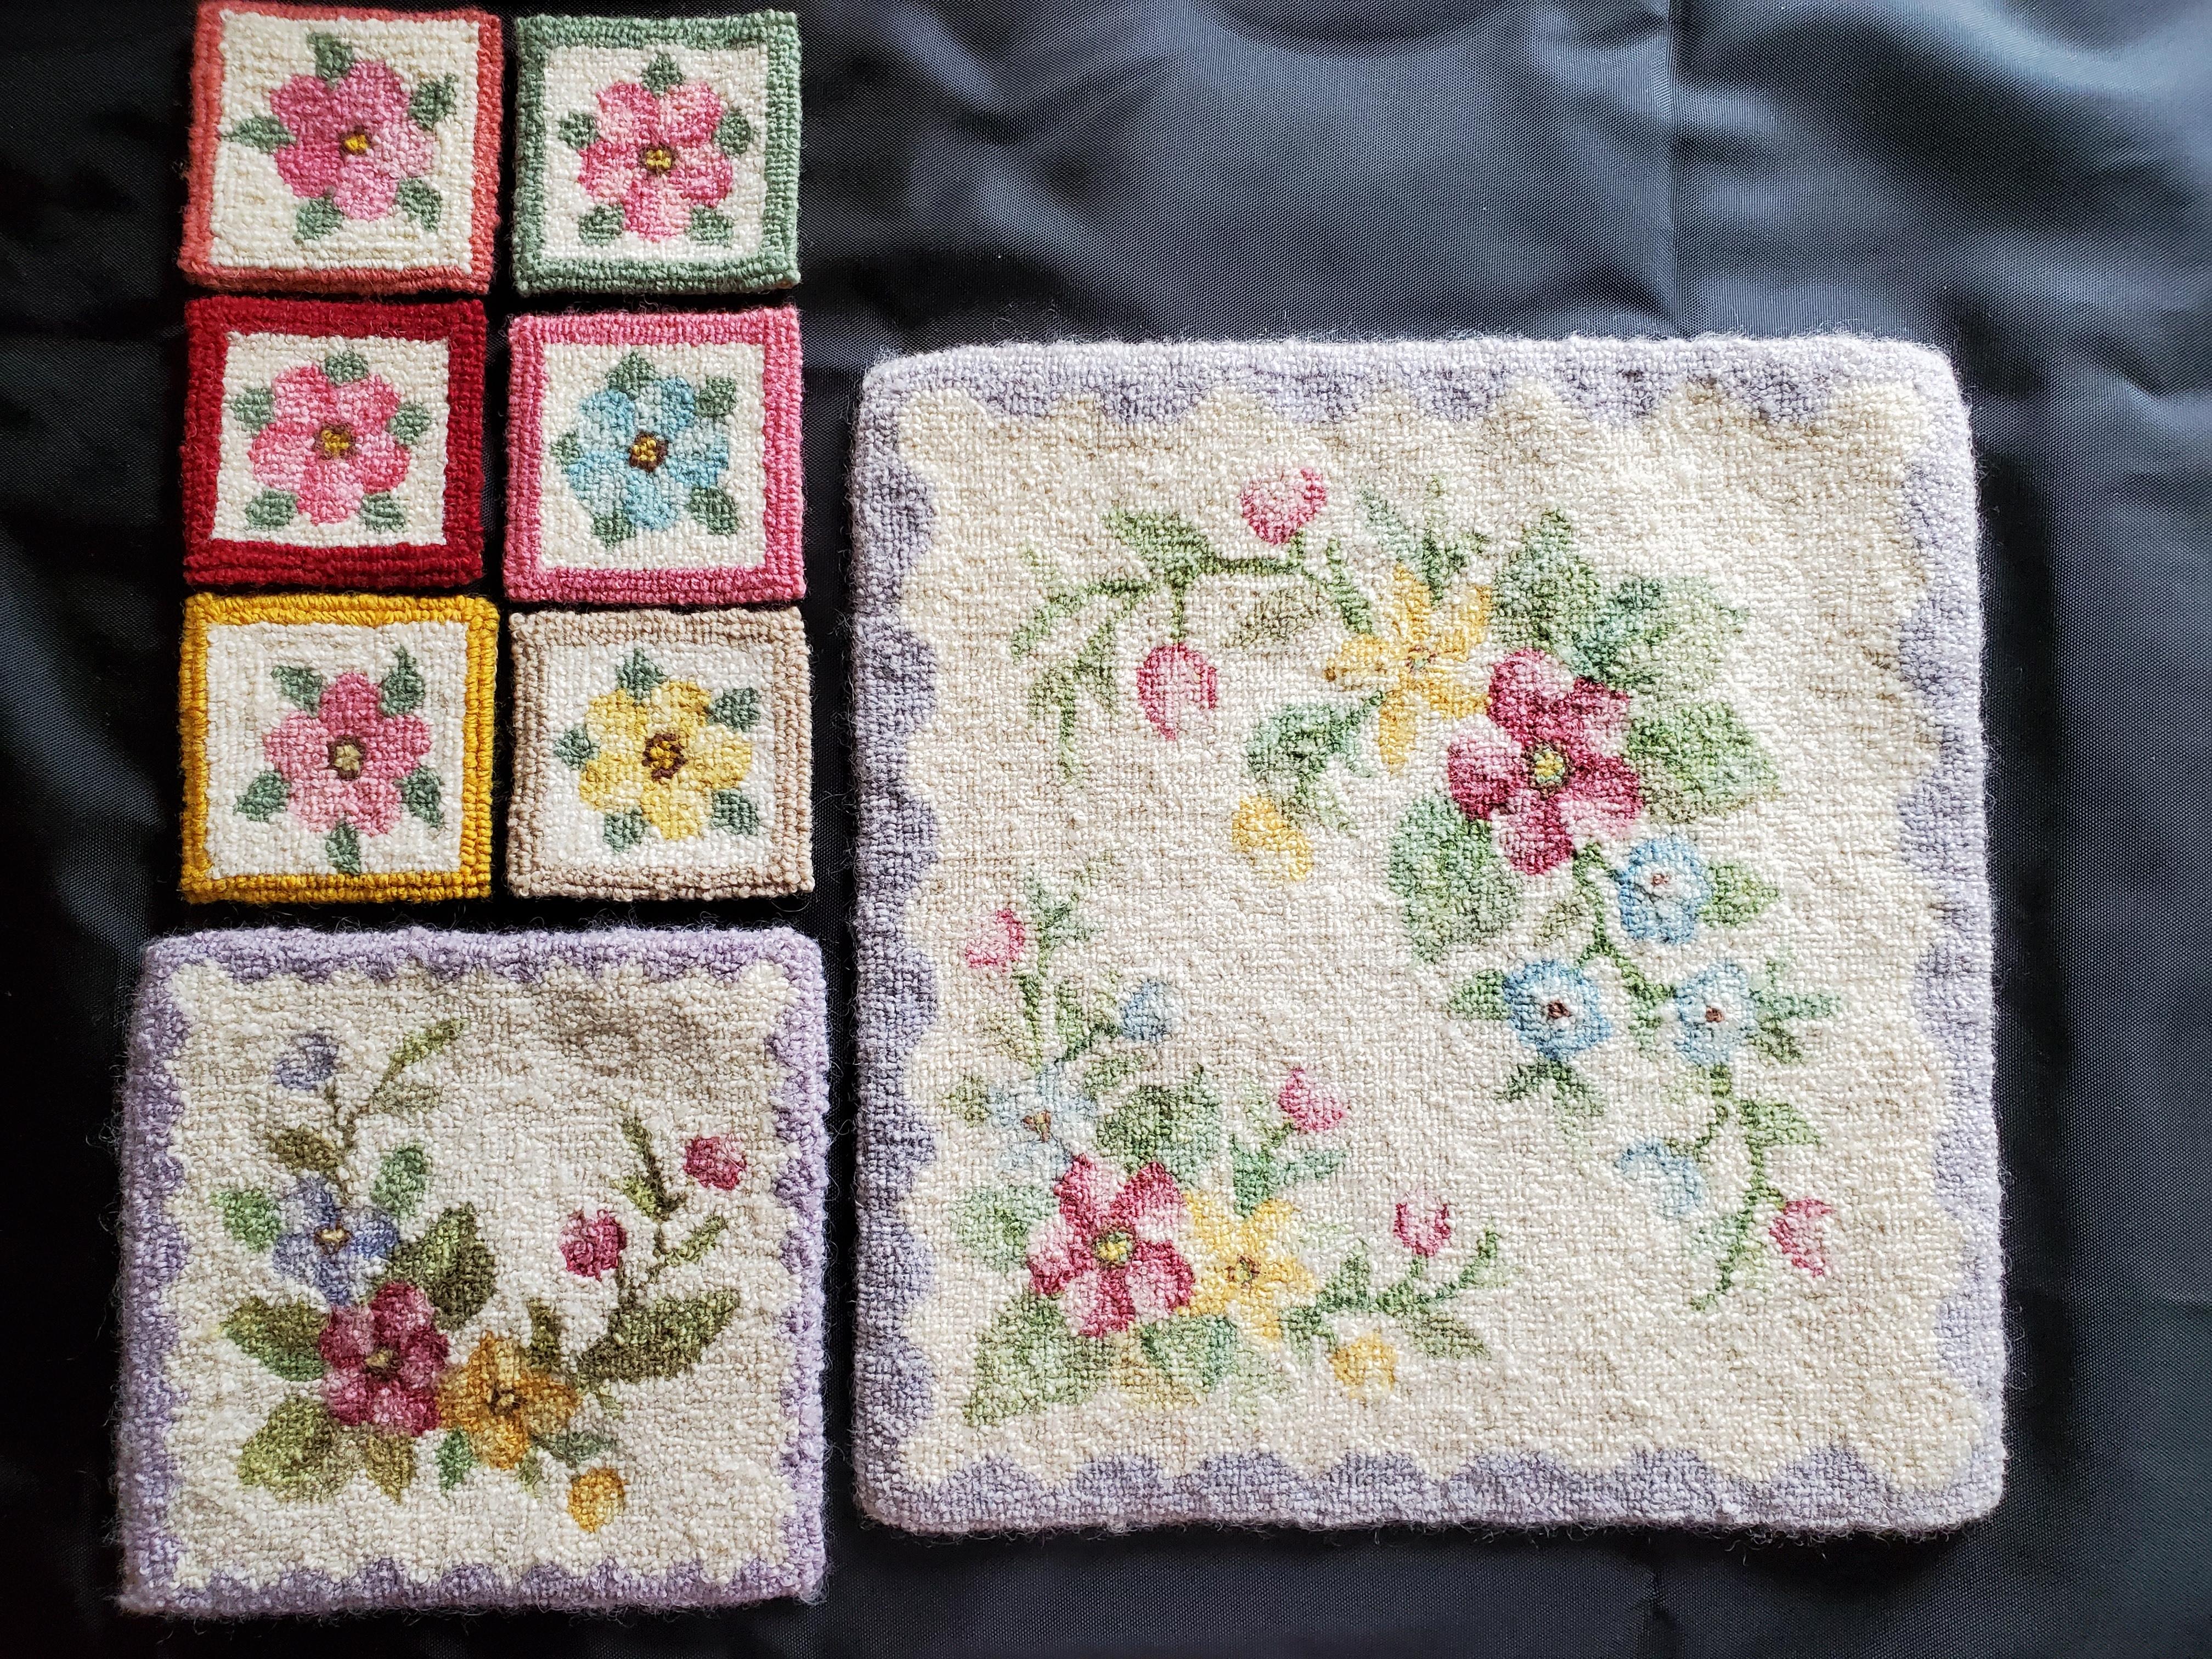 What a unique and beautiful Valentine's Day gift for that special someone!

These beautifully made vintage Chéticamp hand hooked wool mats and coasters were crafted in the traditional method of rug hooking of the area dating back at least 150 years.